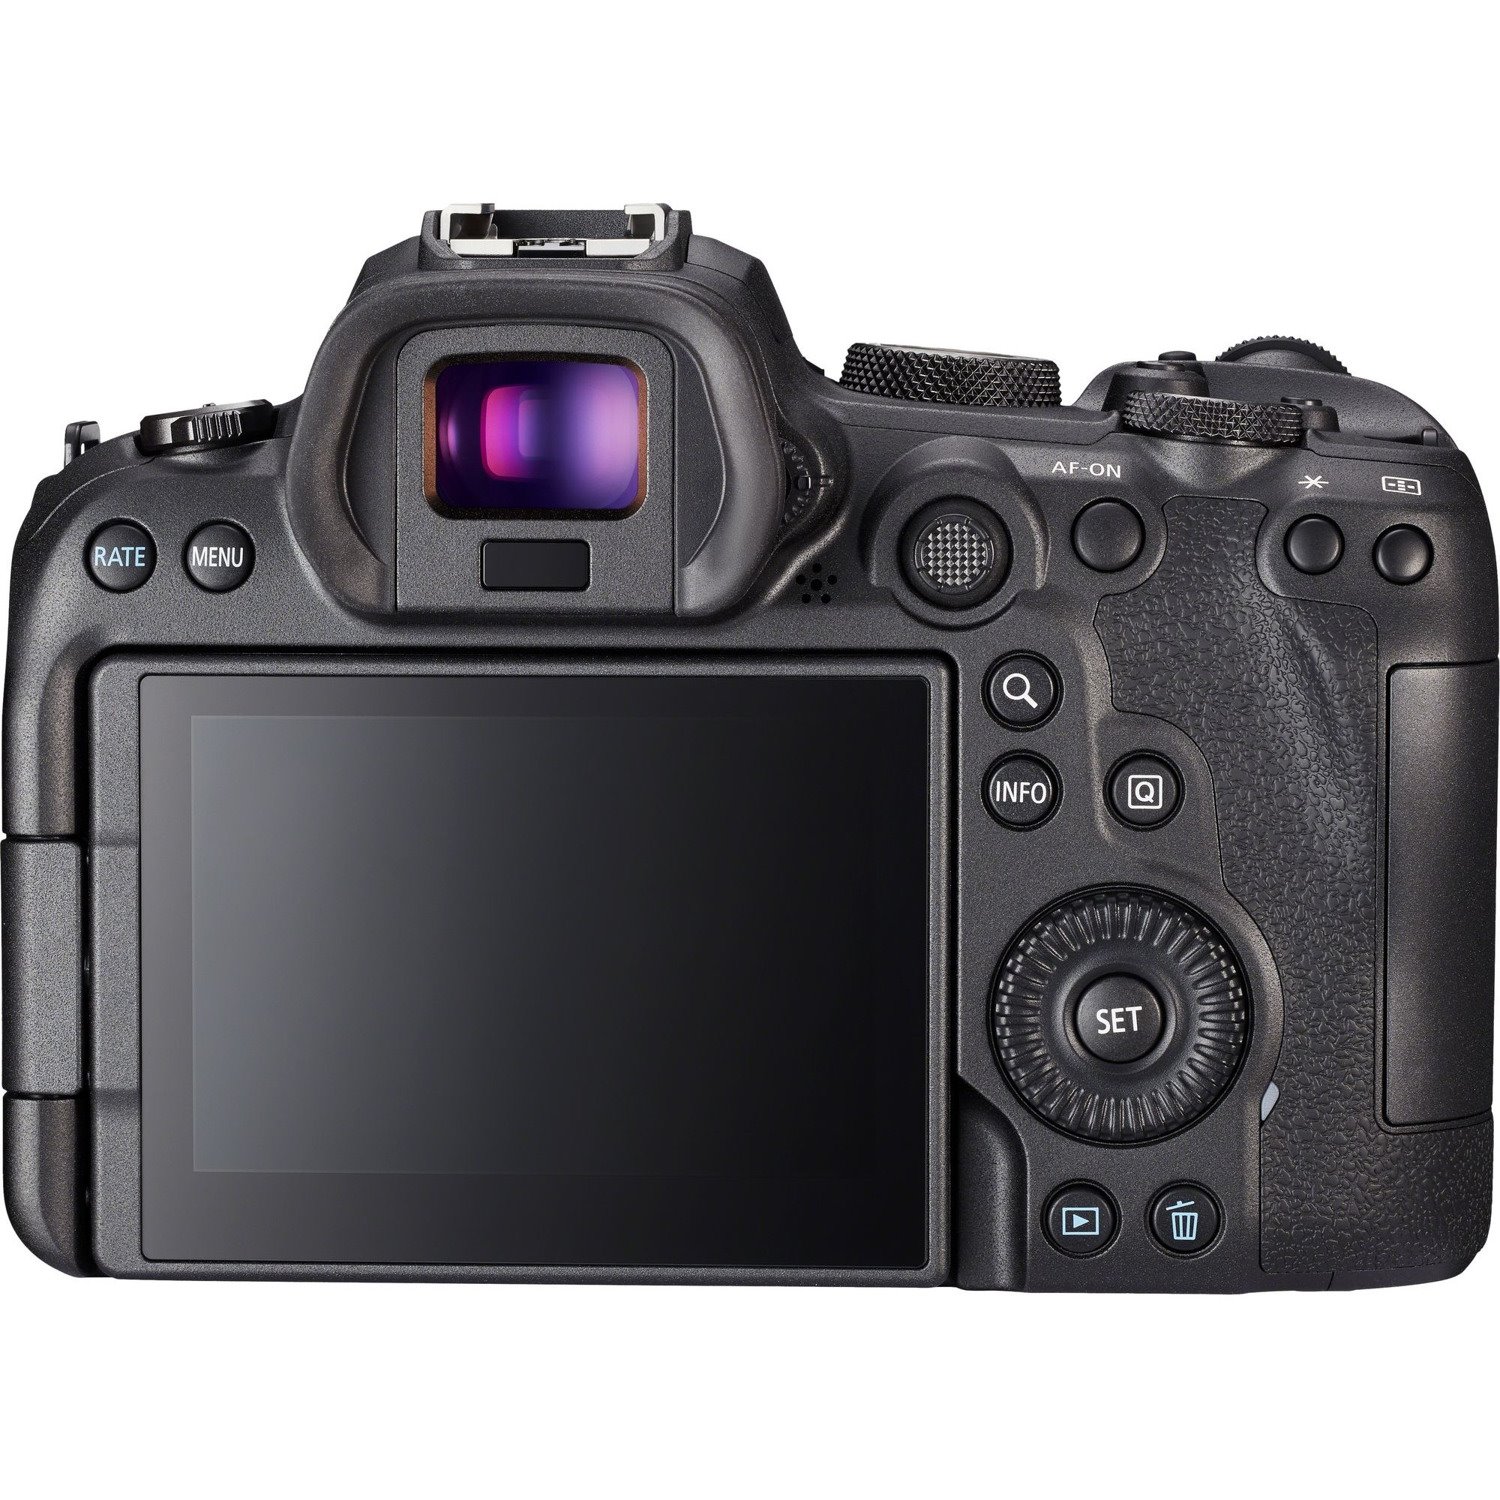 Canon EOS R6 20.1 Megapixel Mirrorless Camera Body Only